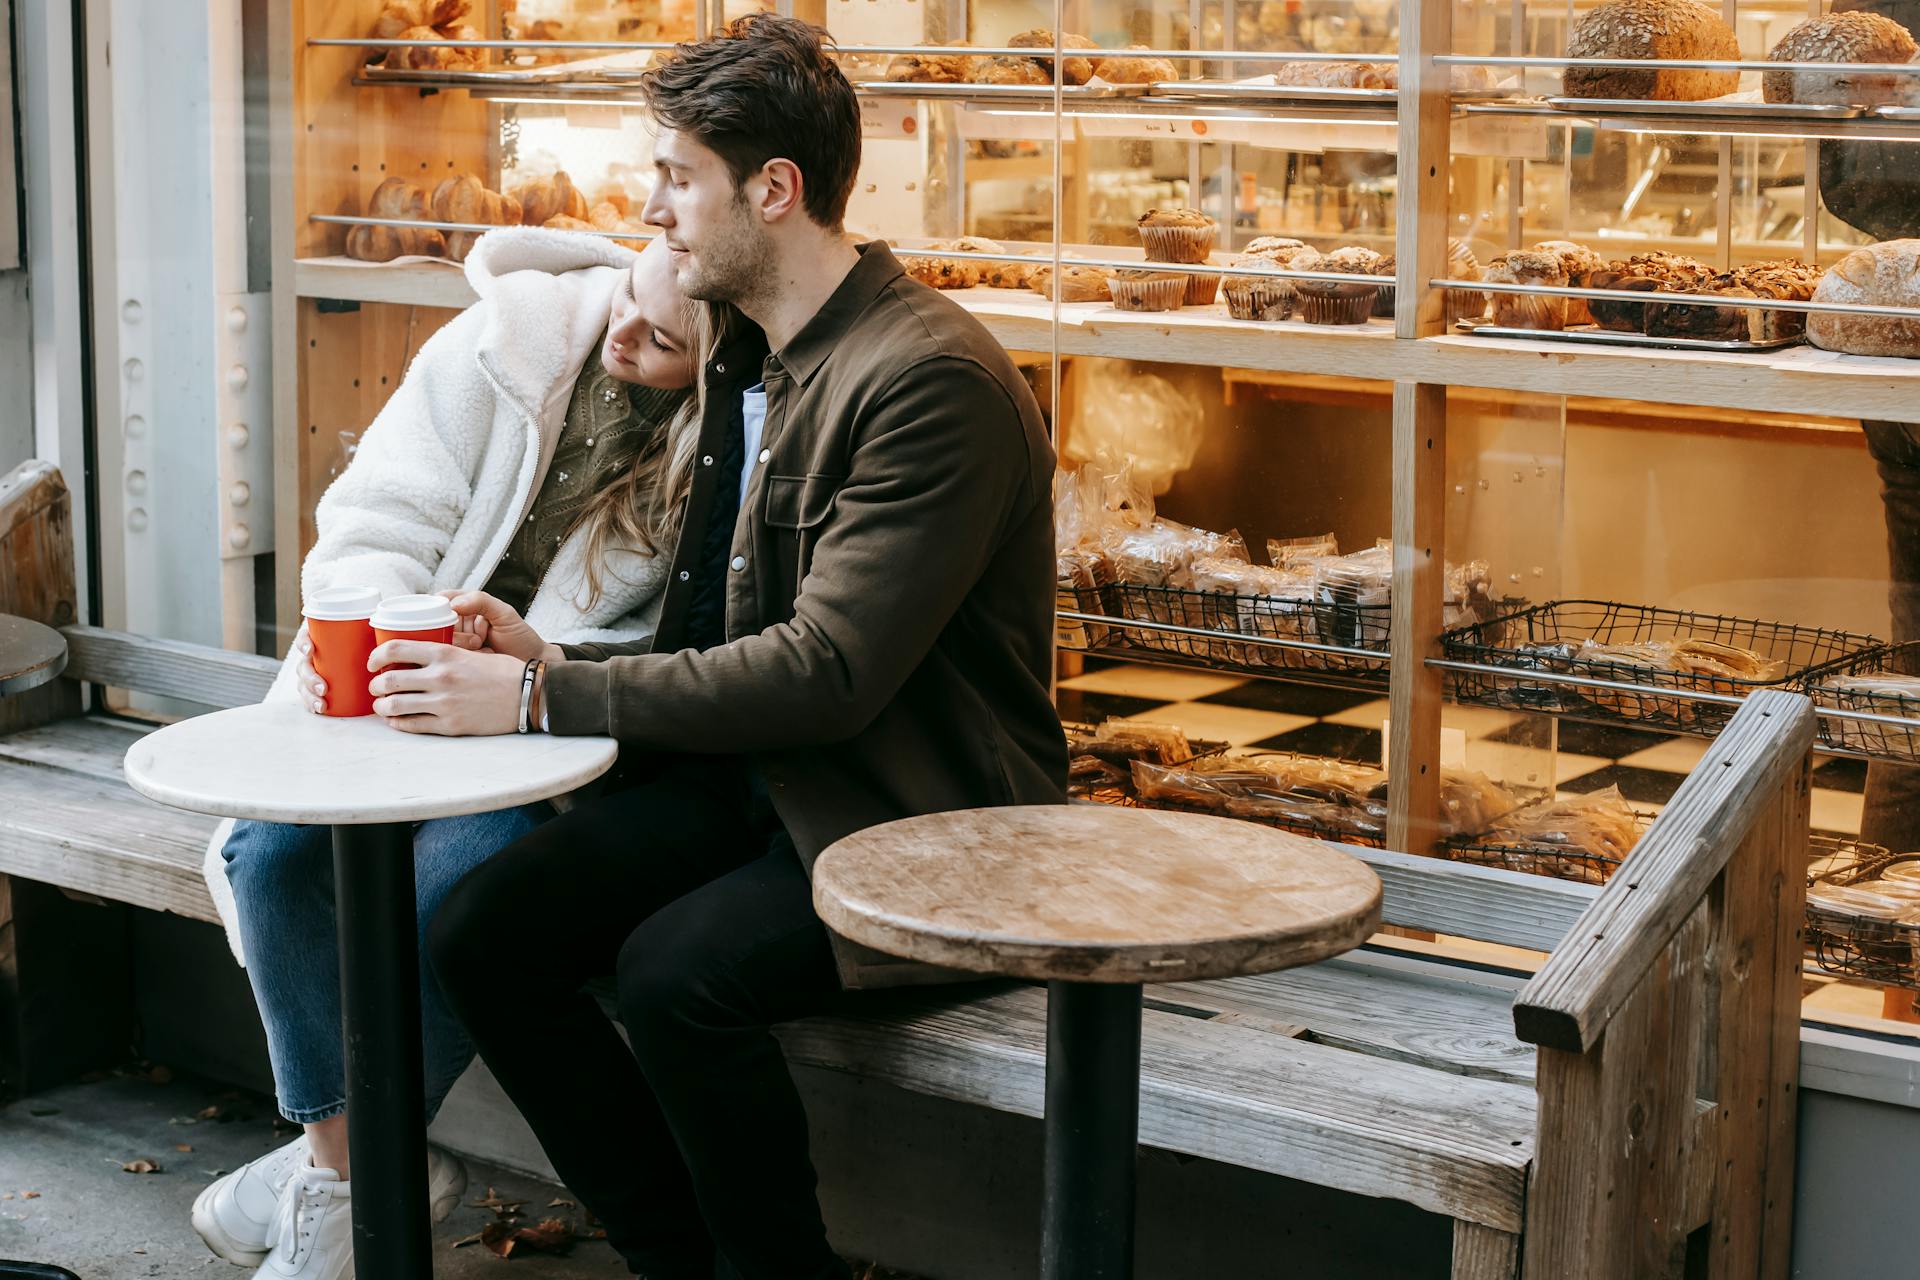 A couple at a coffee shop | Source: Pexels